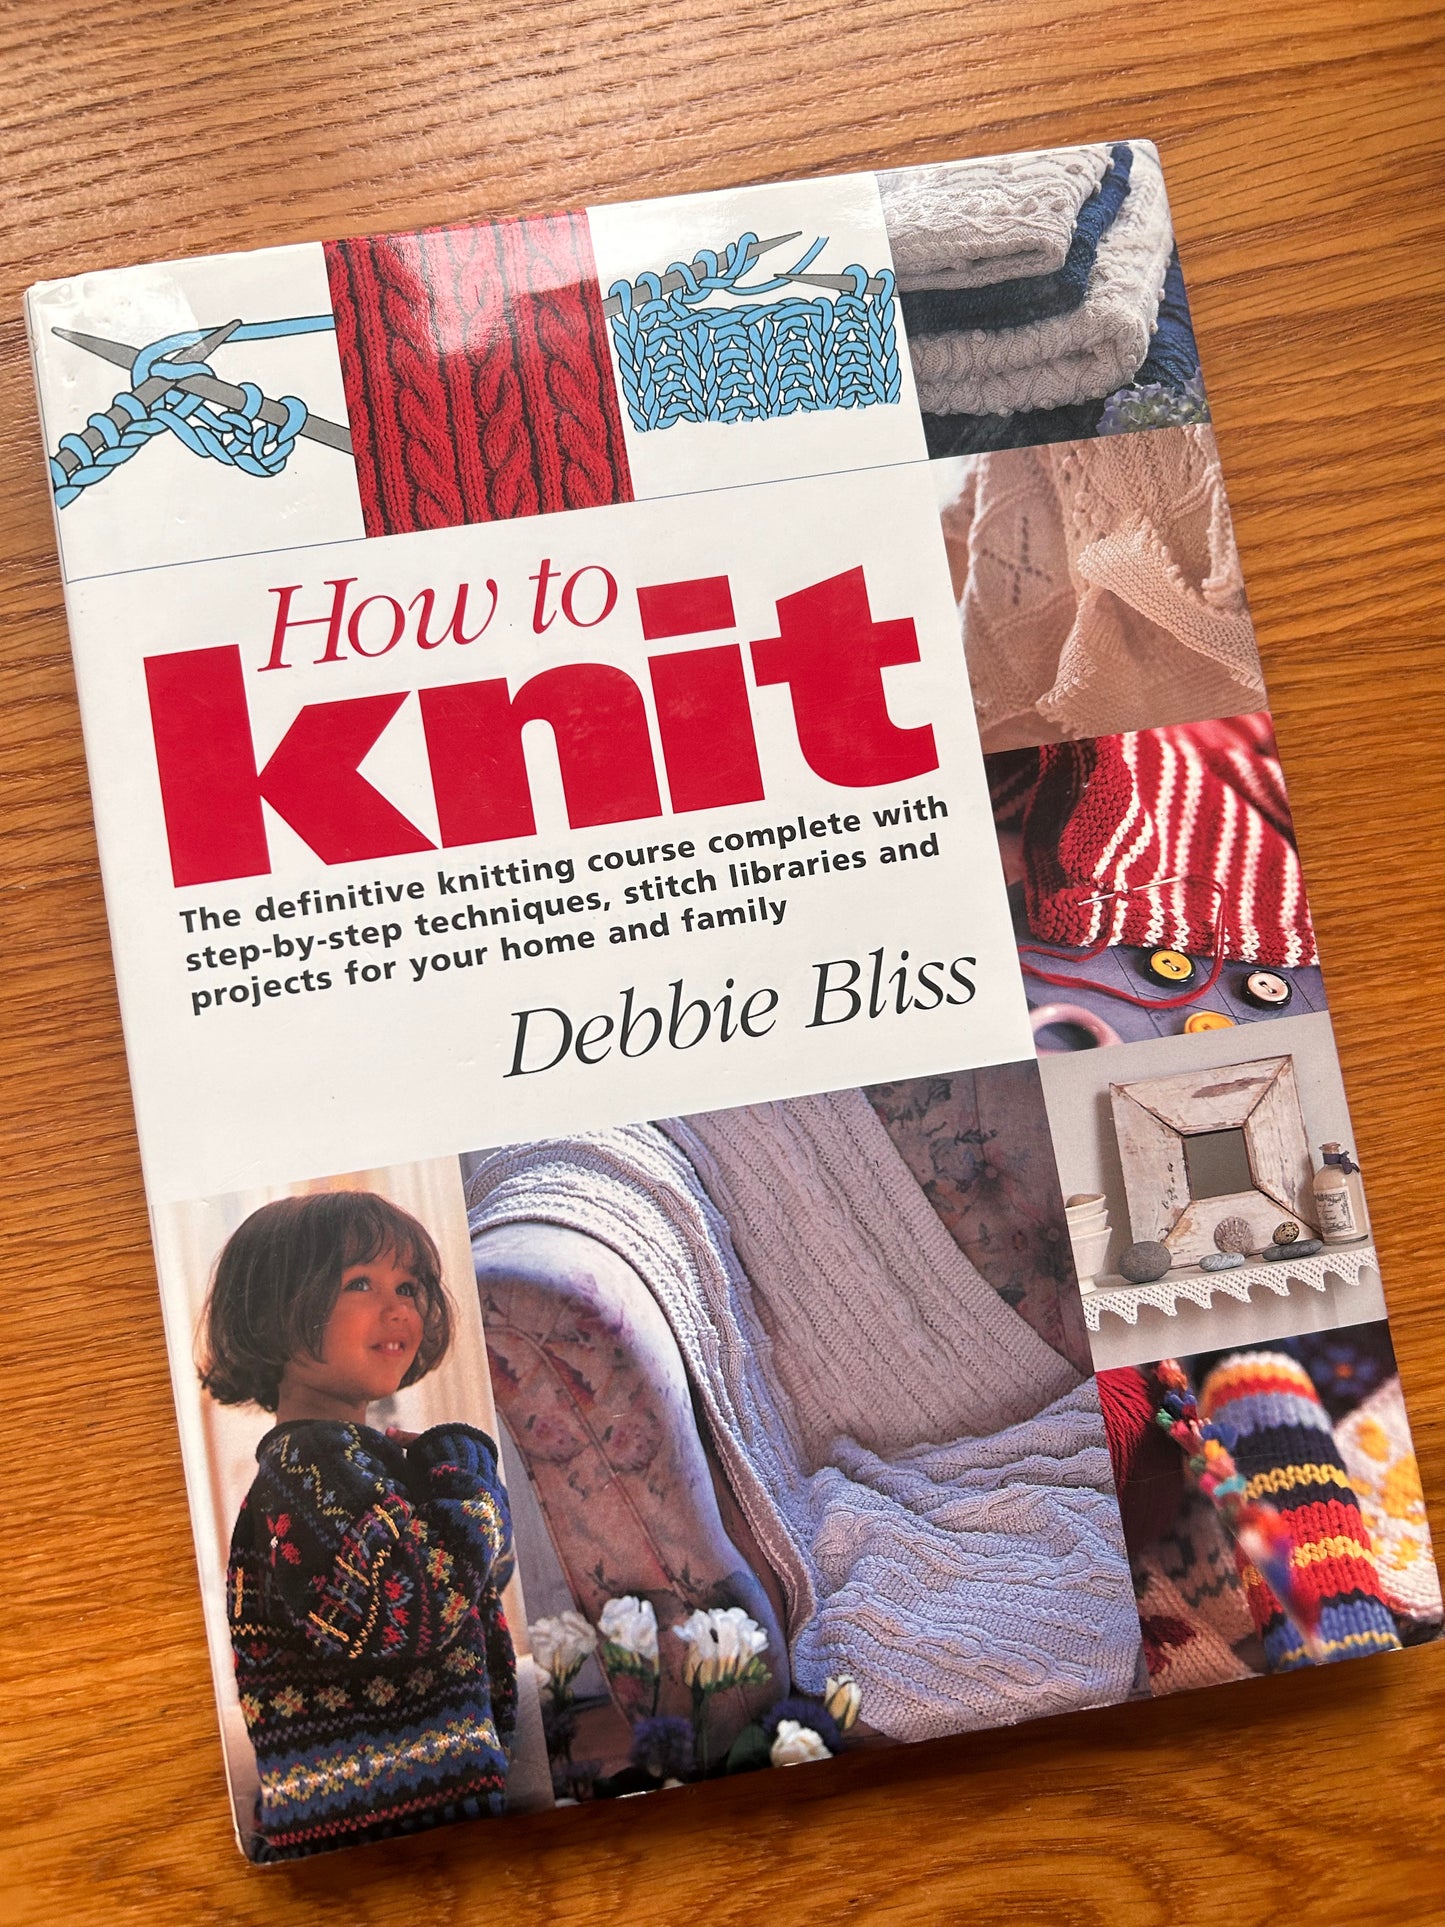 How to Knit: The Definitive Knitting Course Complete with Step-by-Step Techniques, Stitch Libraries and Projects for Your Home and Family